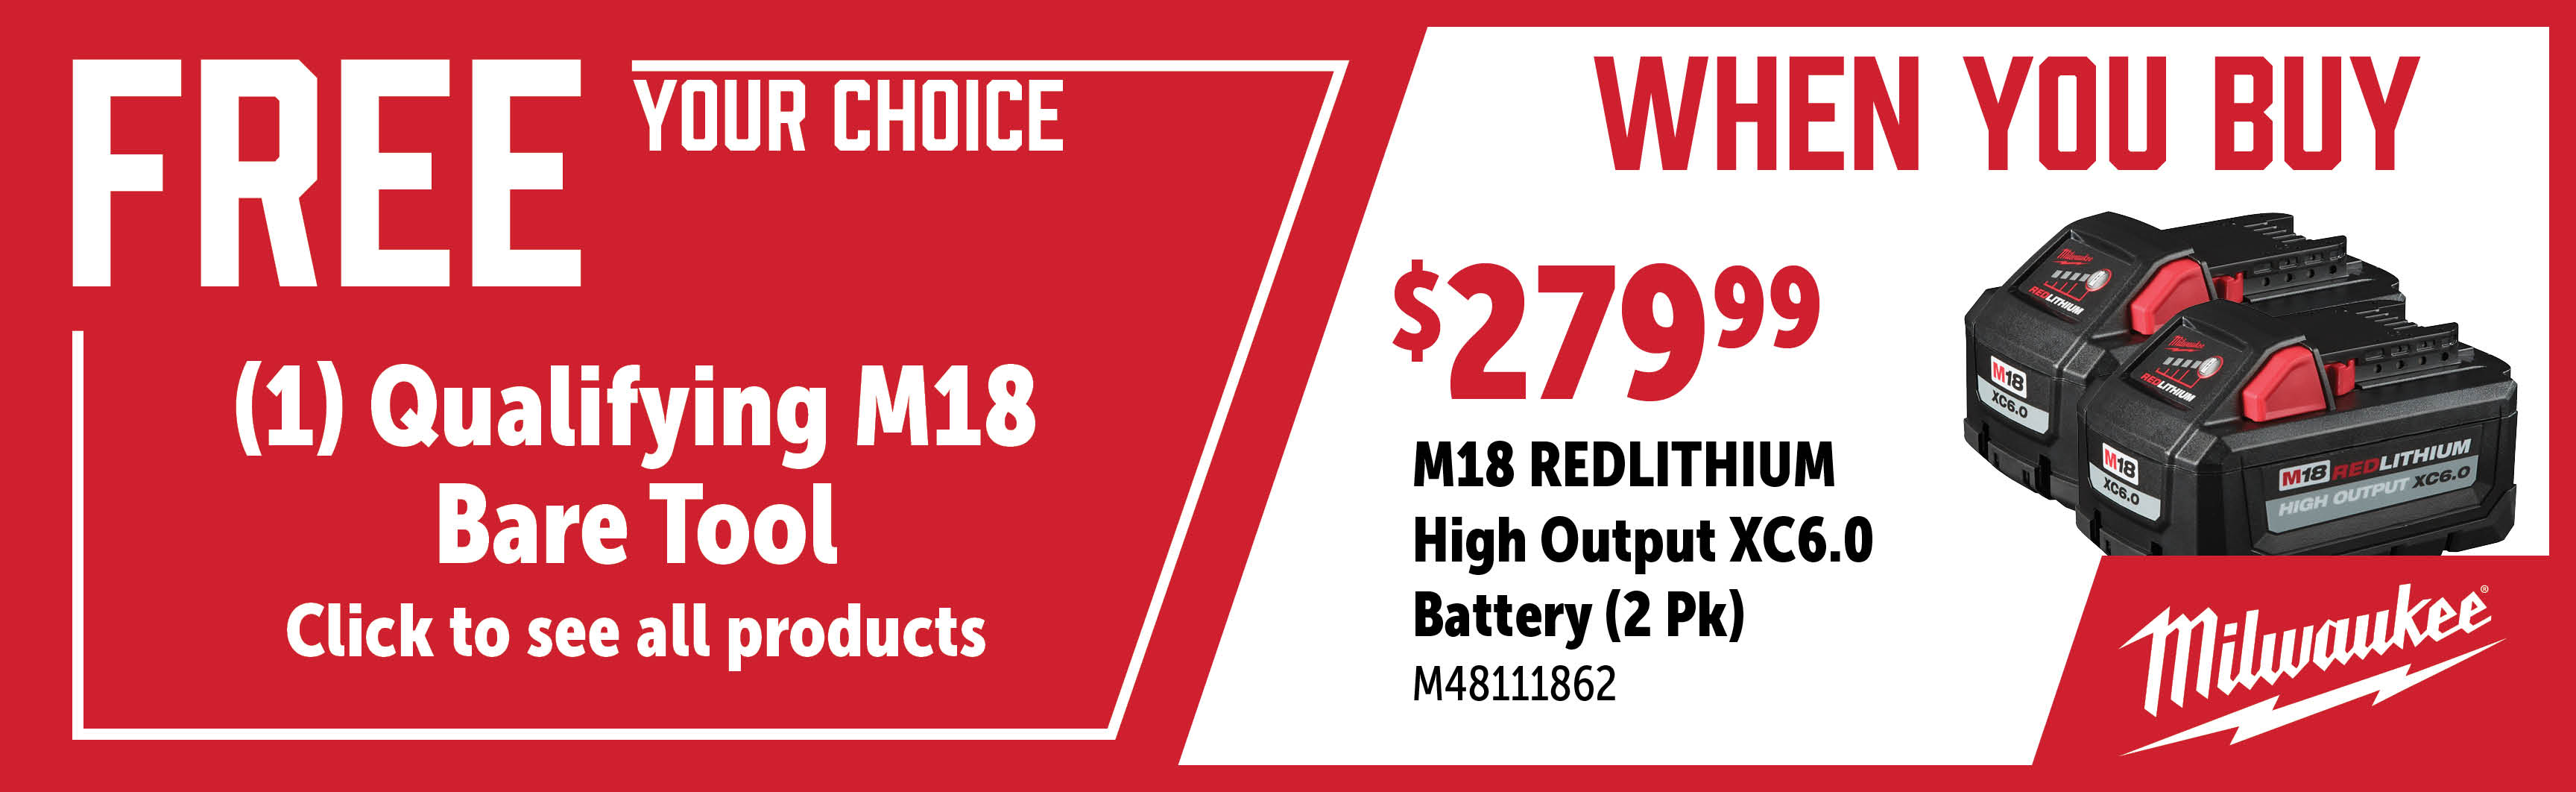 Milwaukee May - July: Buy a M48111862 2pk Battery get a FREE Qualifying Bare Tool